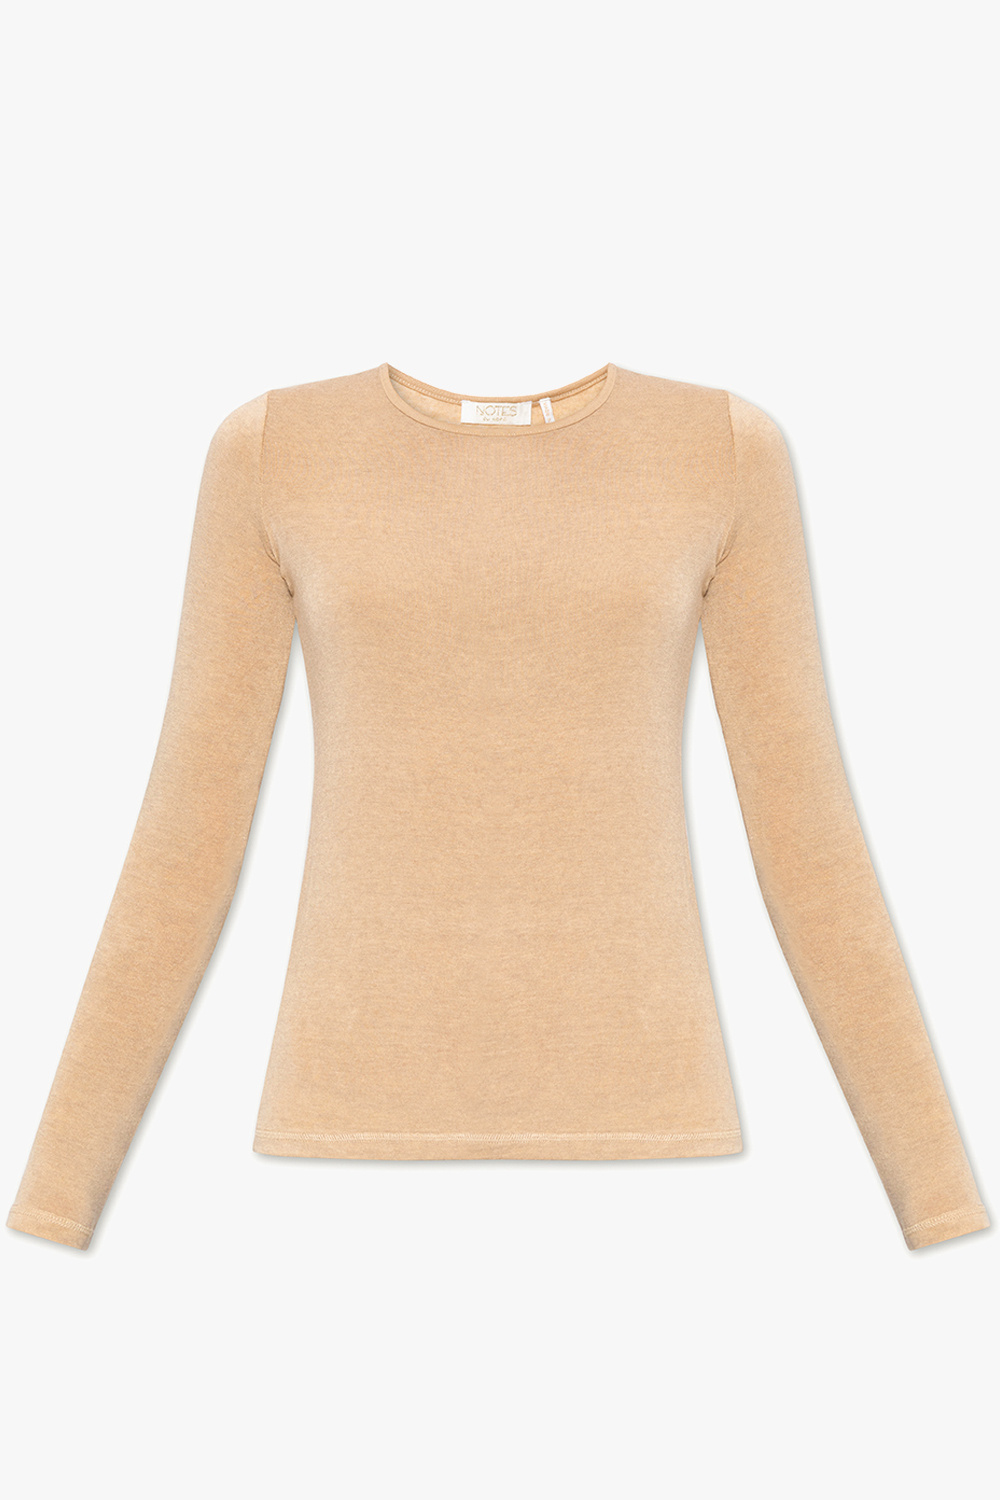 Notes Du Nord ‘Bea’ top with long sleeves